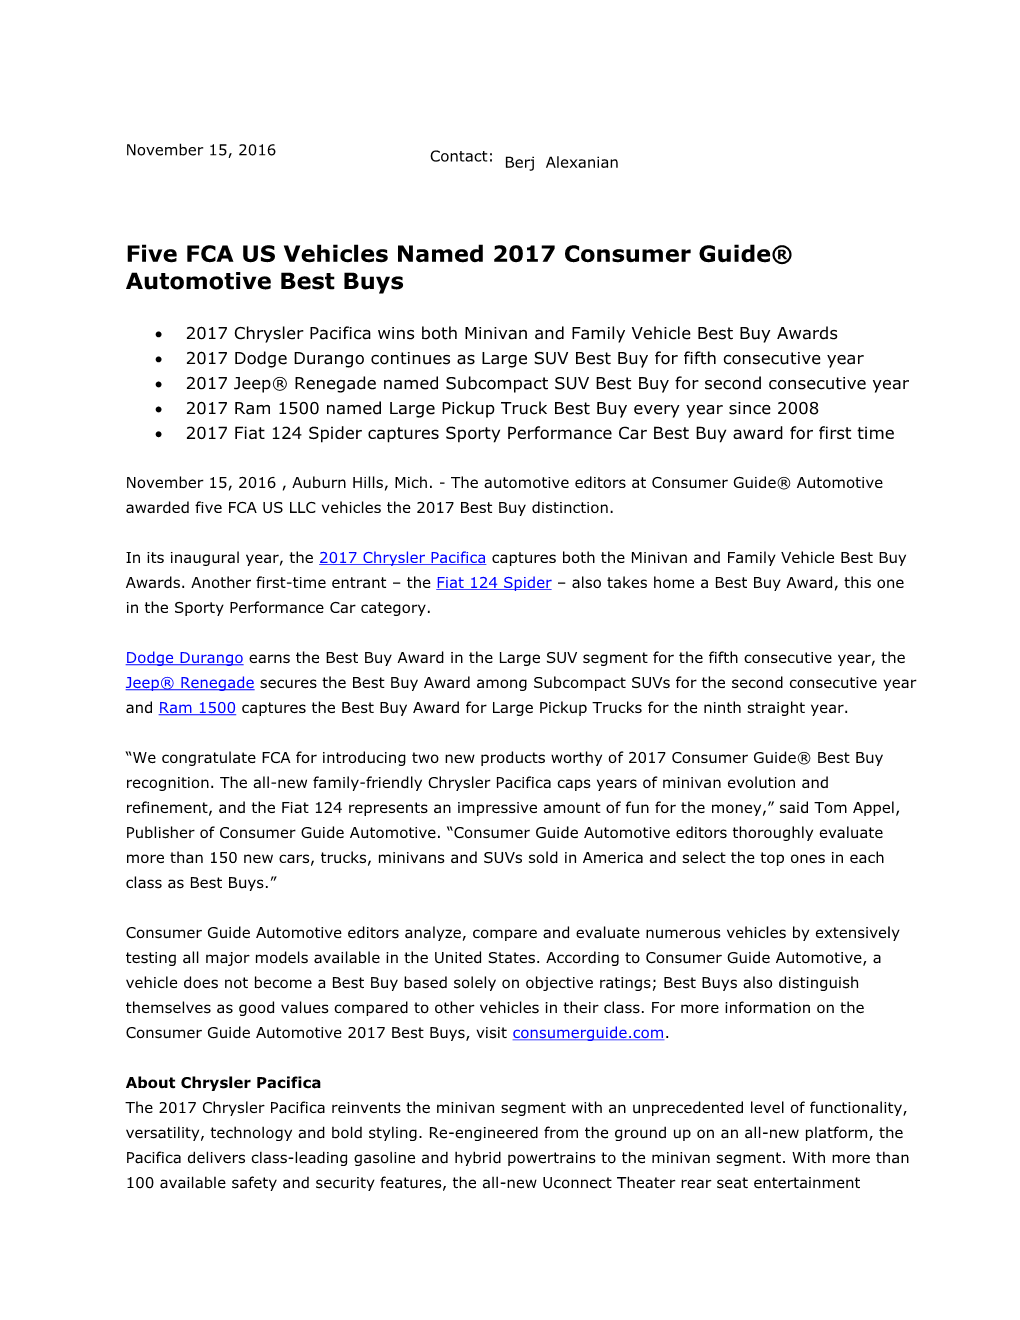 Five FCA US Vehicles Named 2017 Consumer Guide® Automotive Best Buys